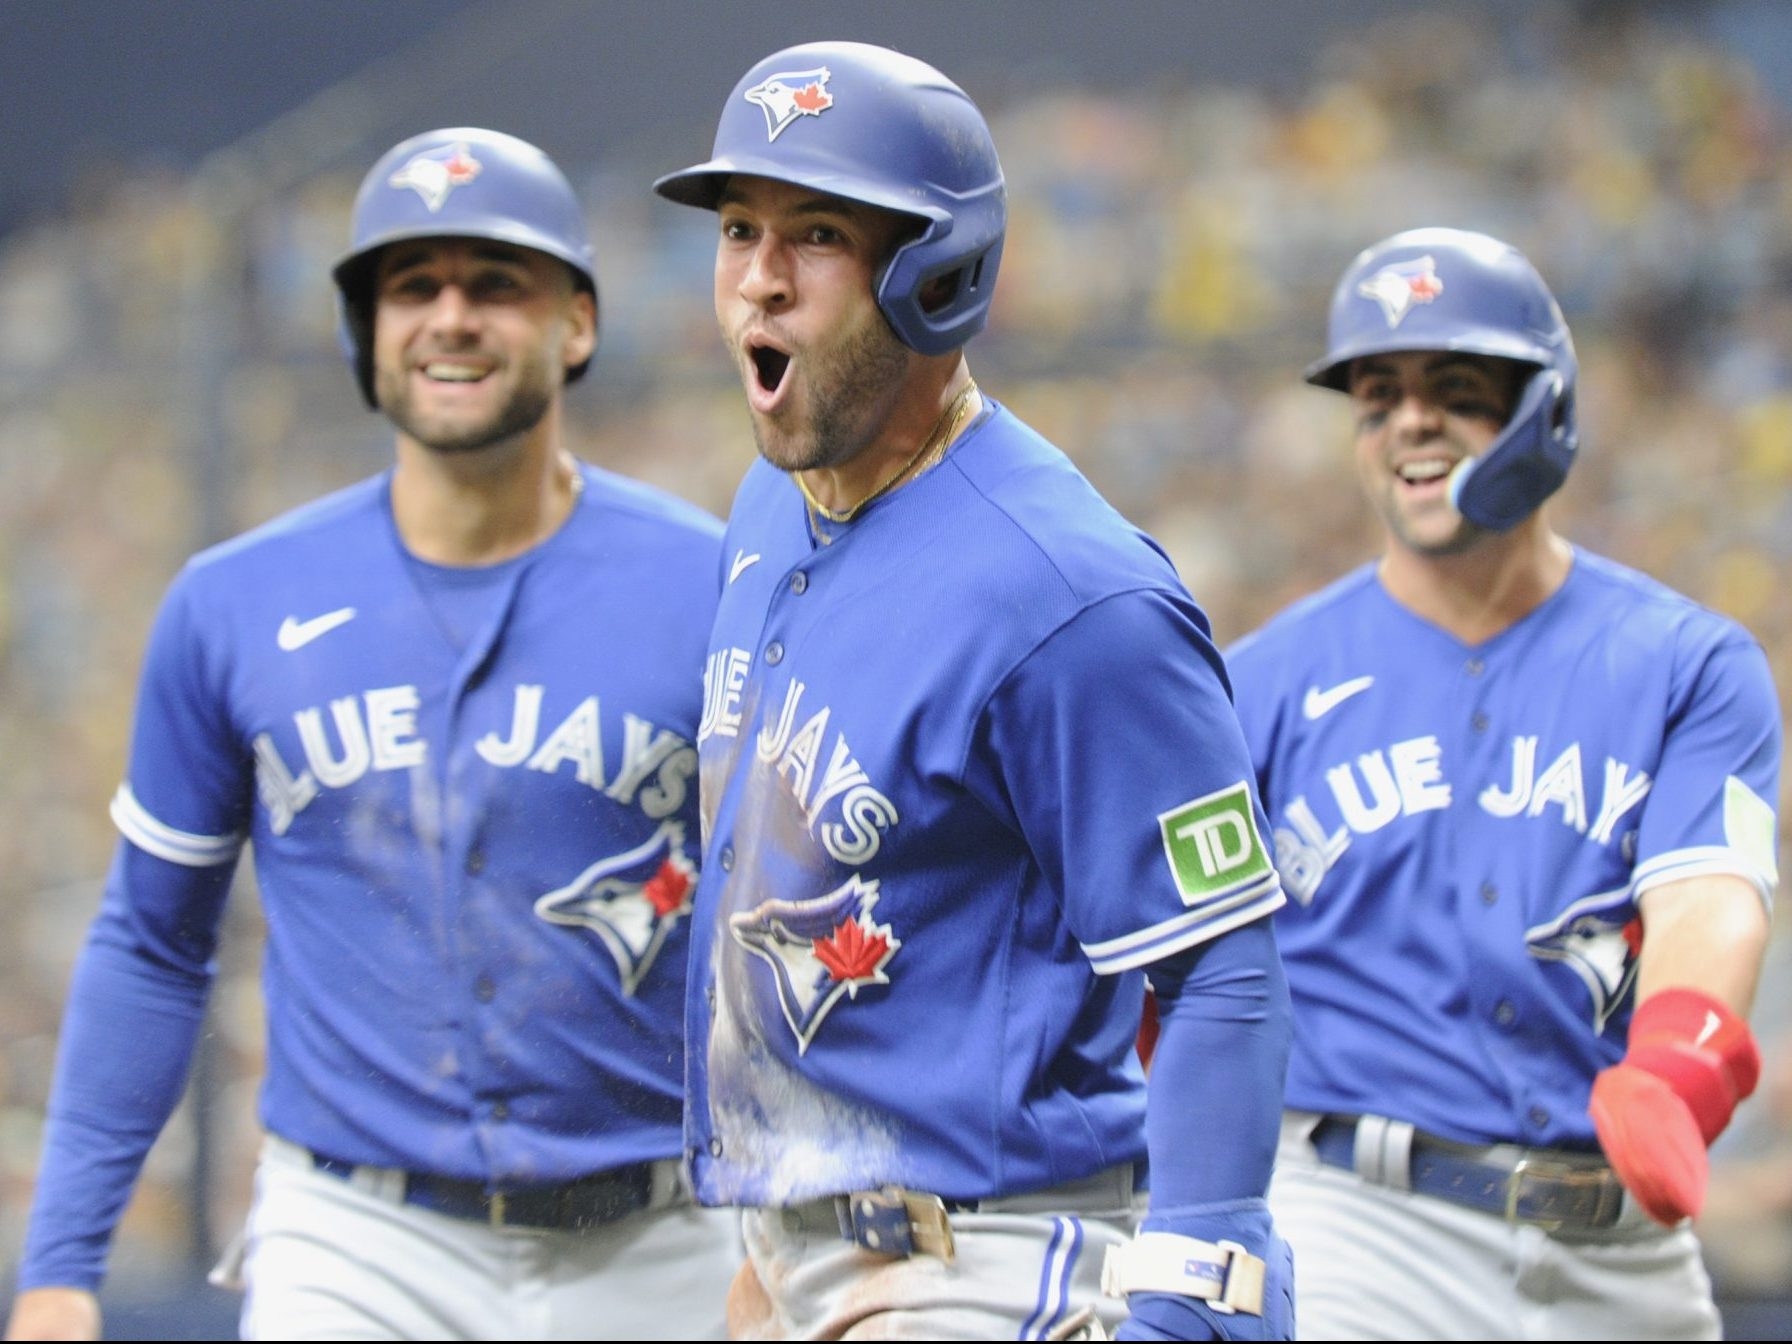 After season of inconsistency, Blue Jays heating up at perfect time